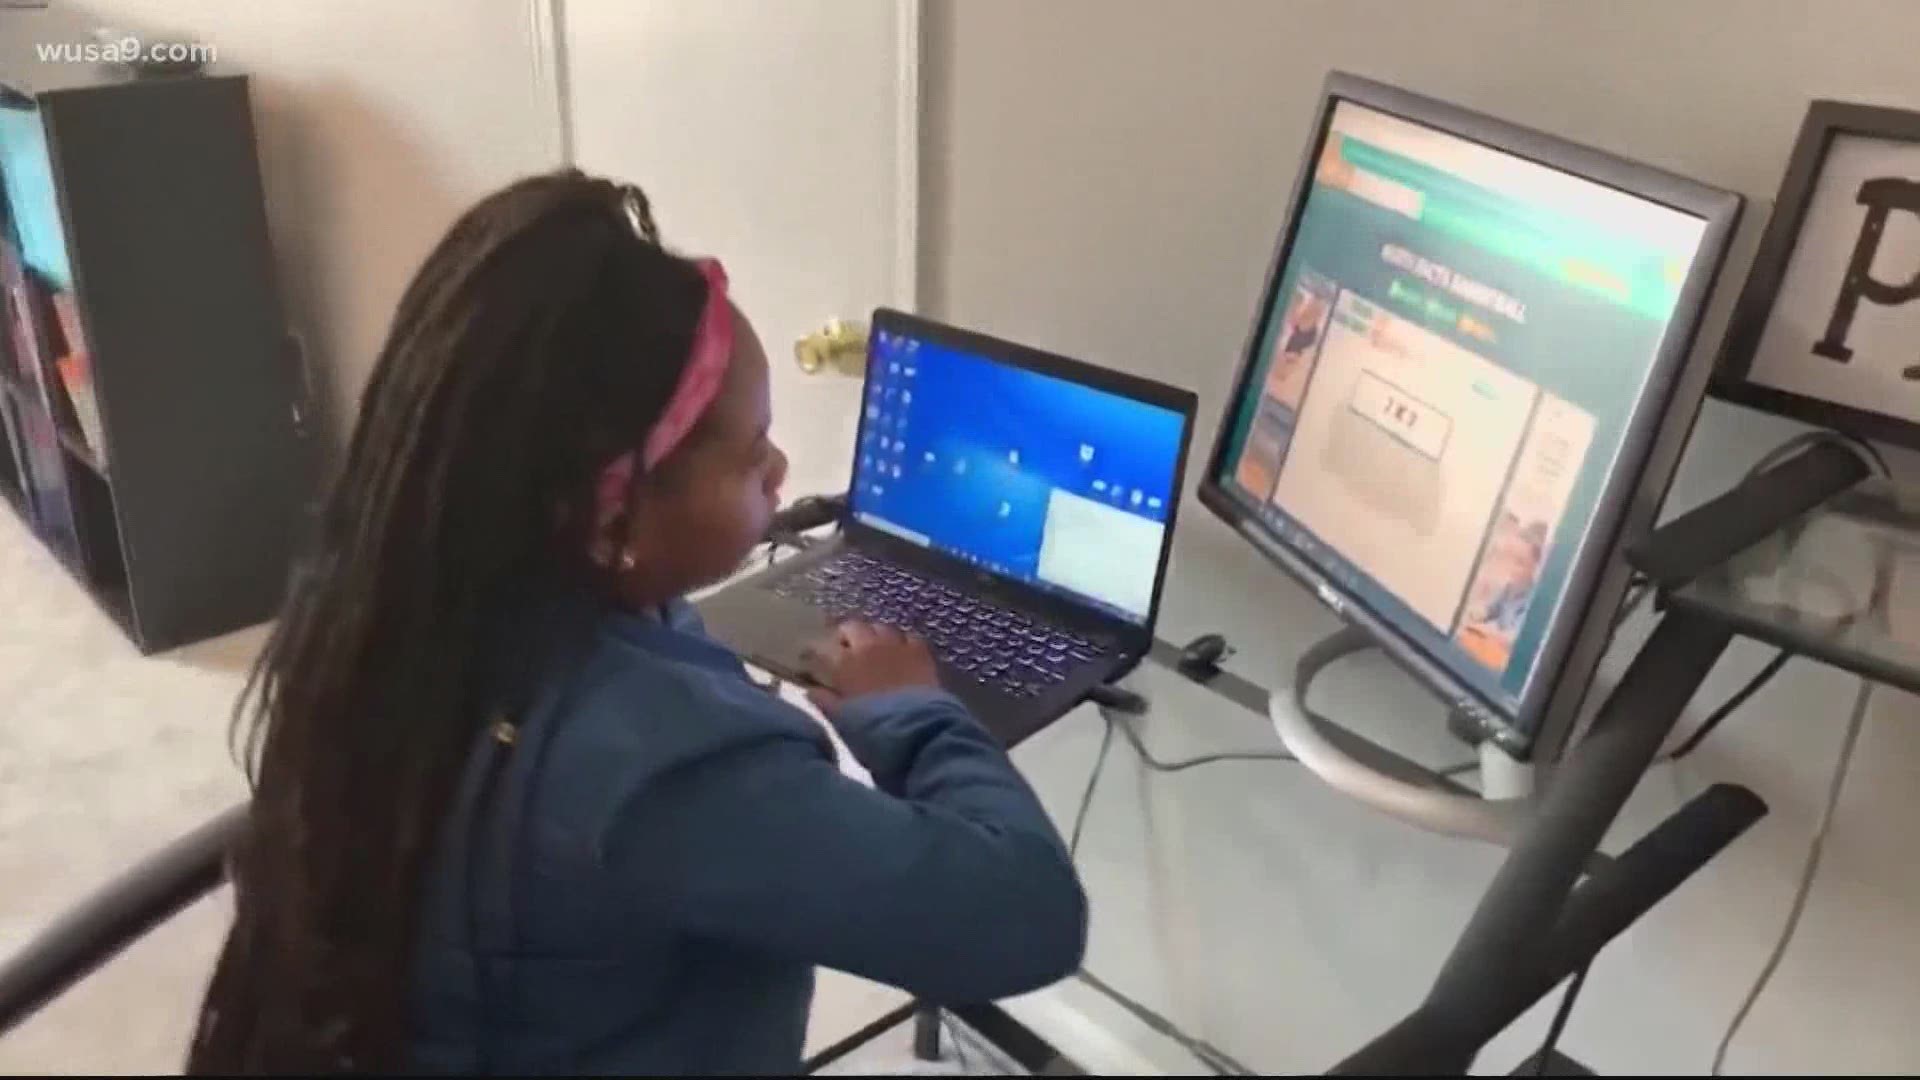 The non-profit GIVE Youth has seen a spike in calls inquiring about free tutoring services as families prepare for virtual learning this fall.